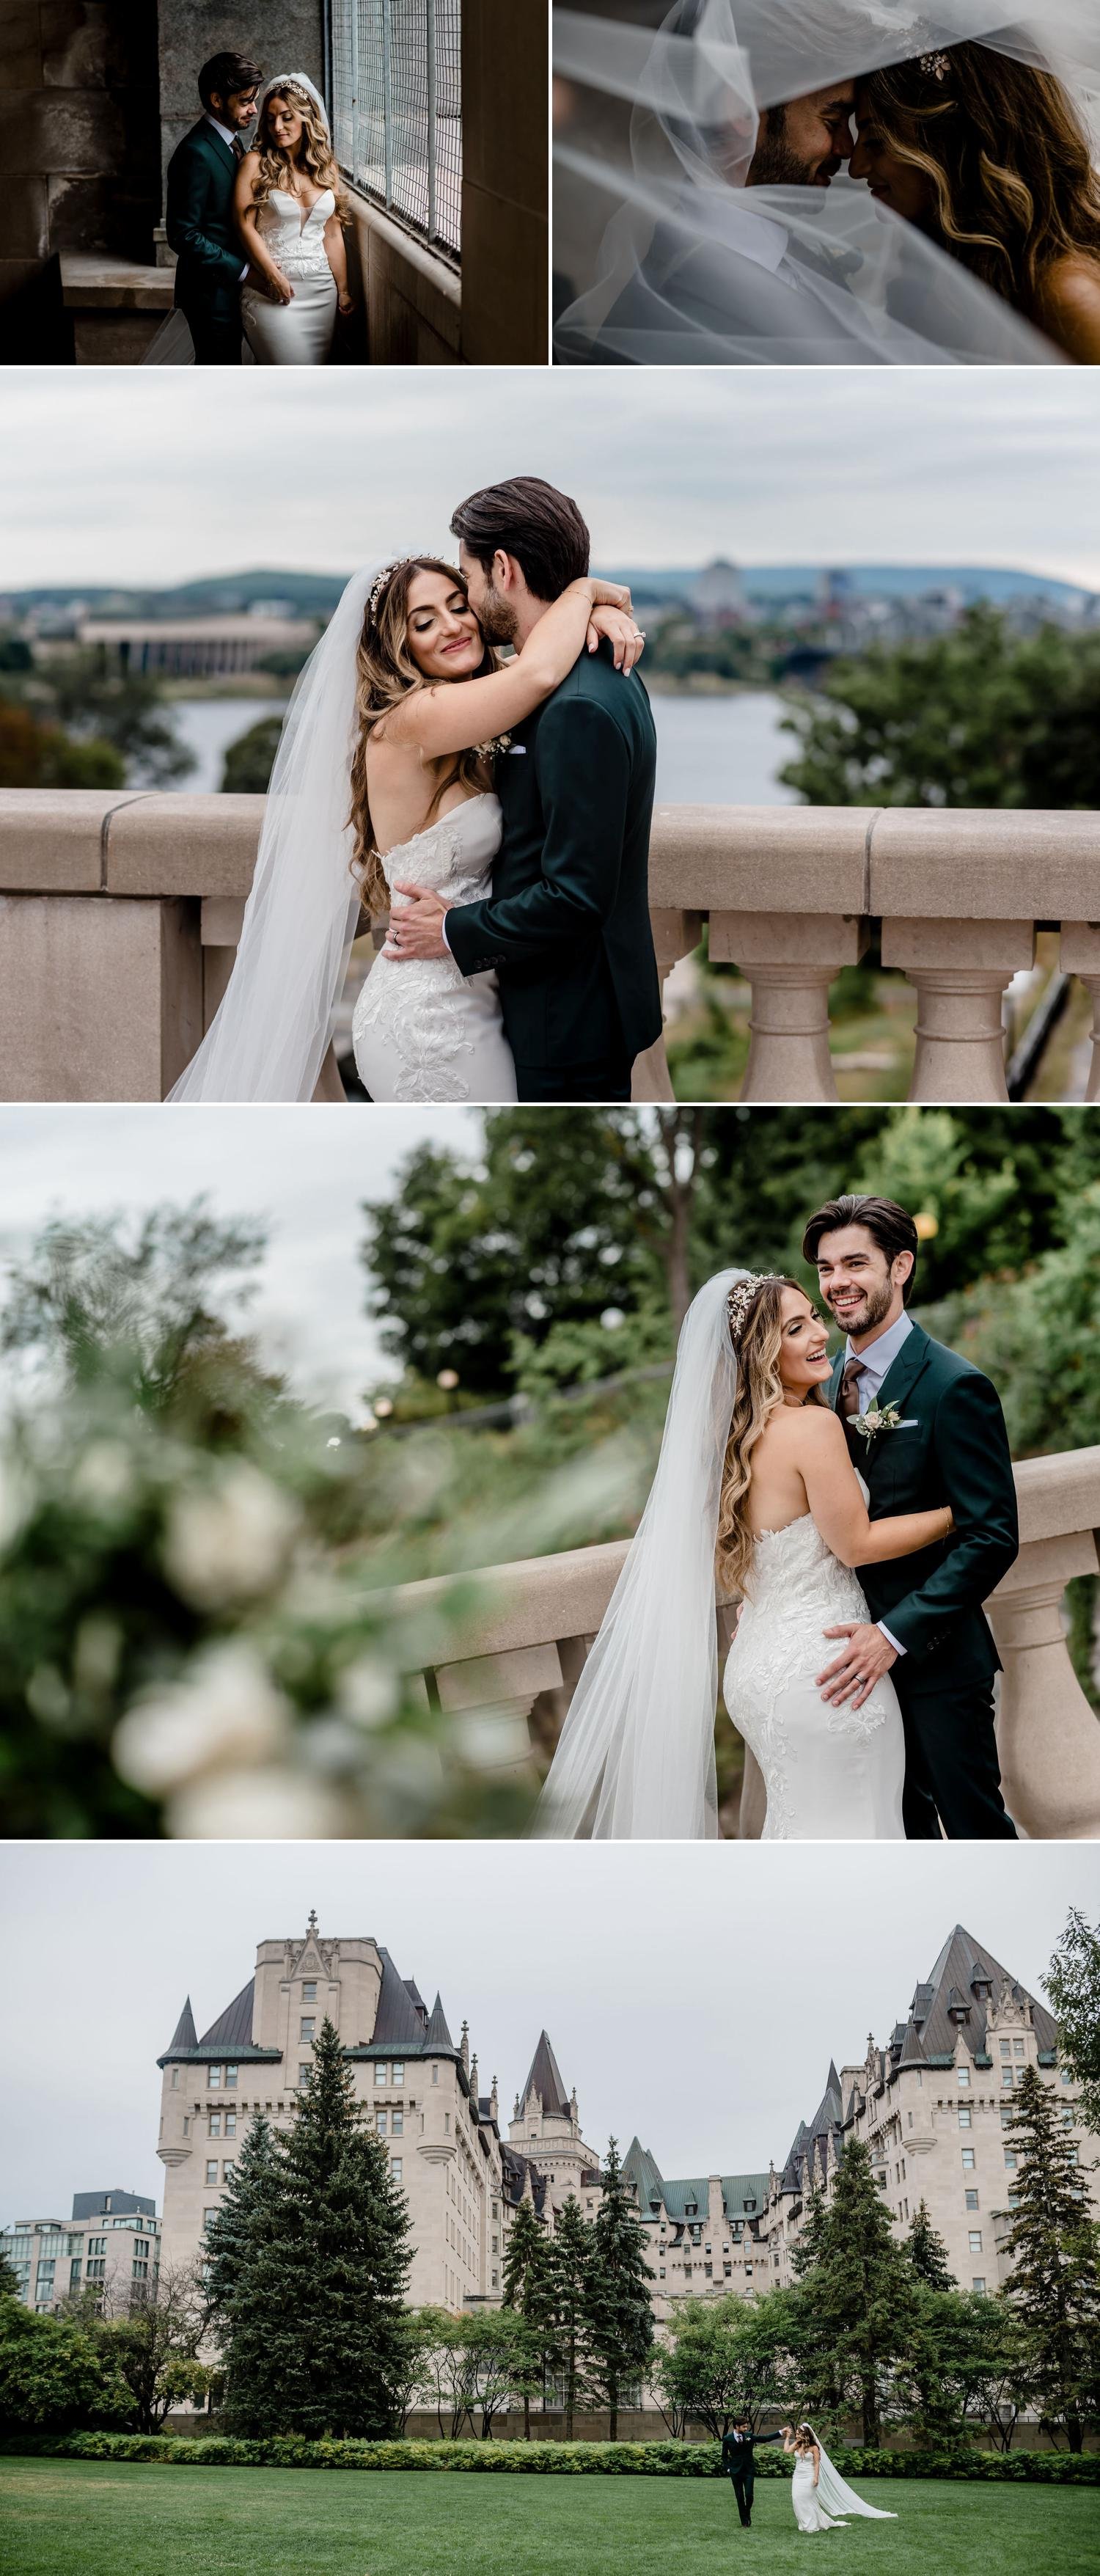 photos of a bride and groom in ottawa